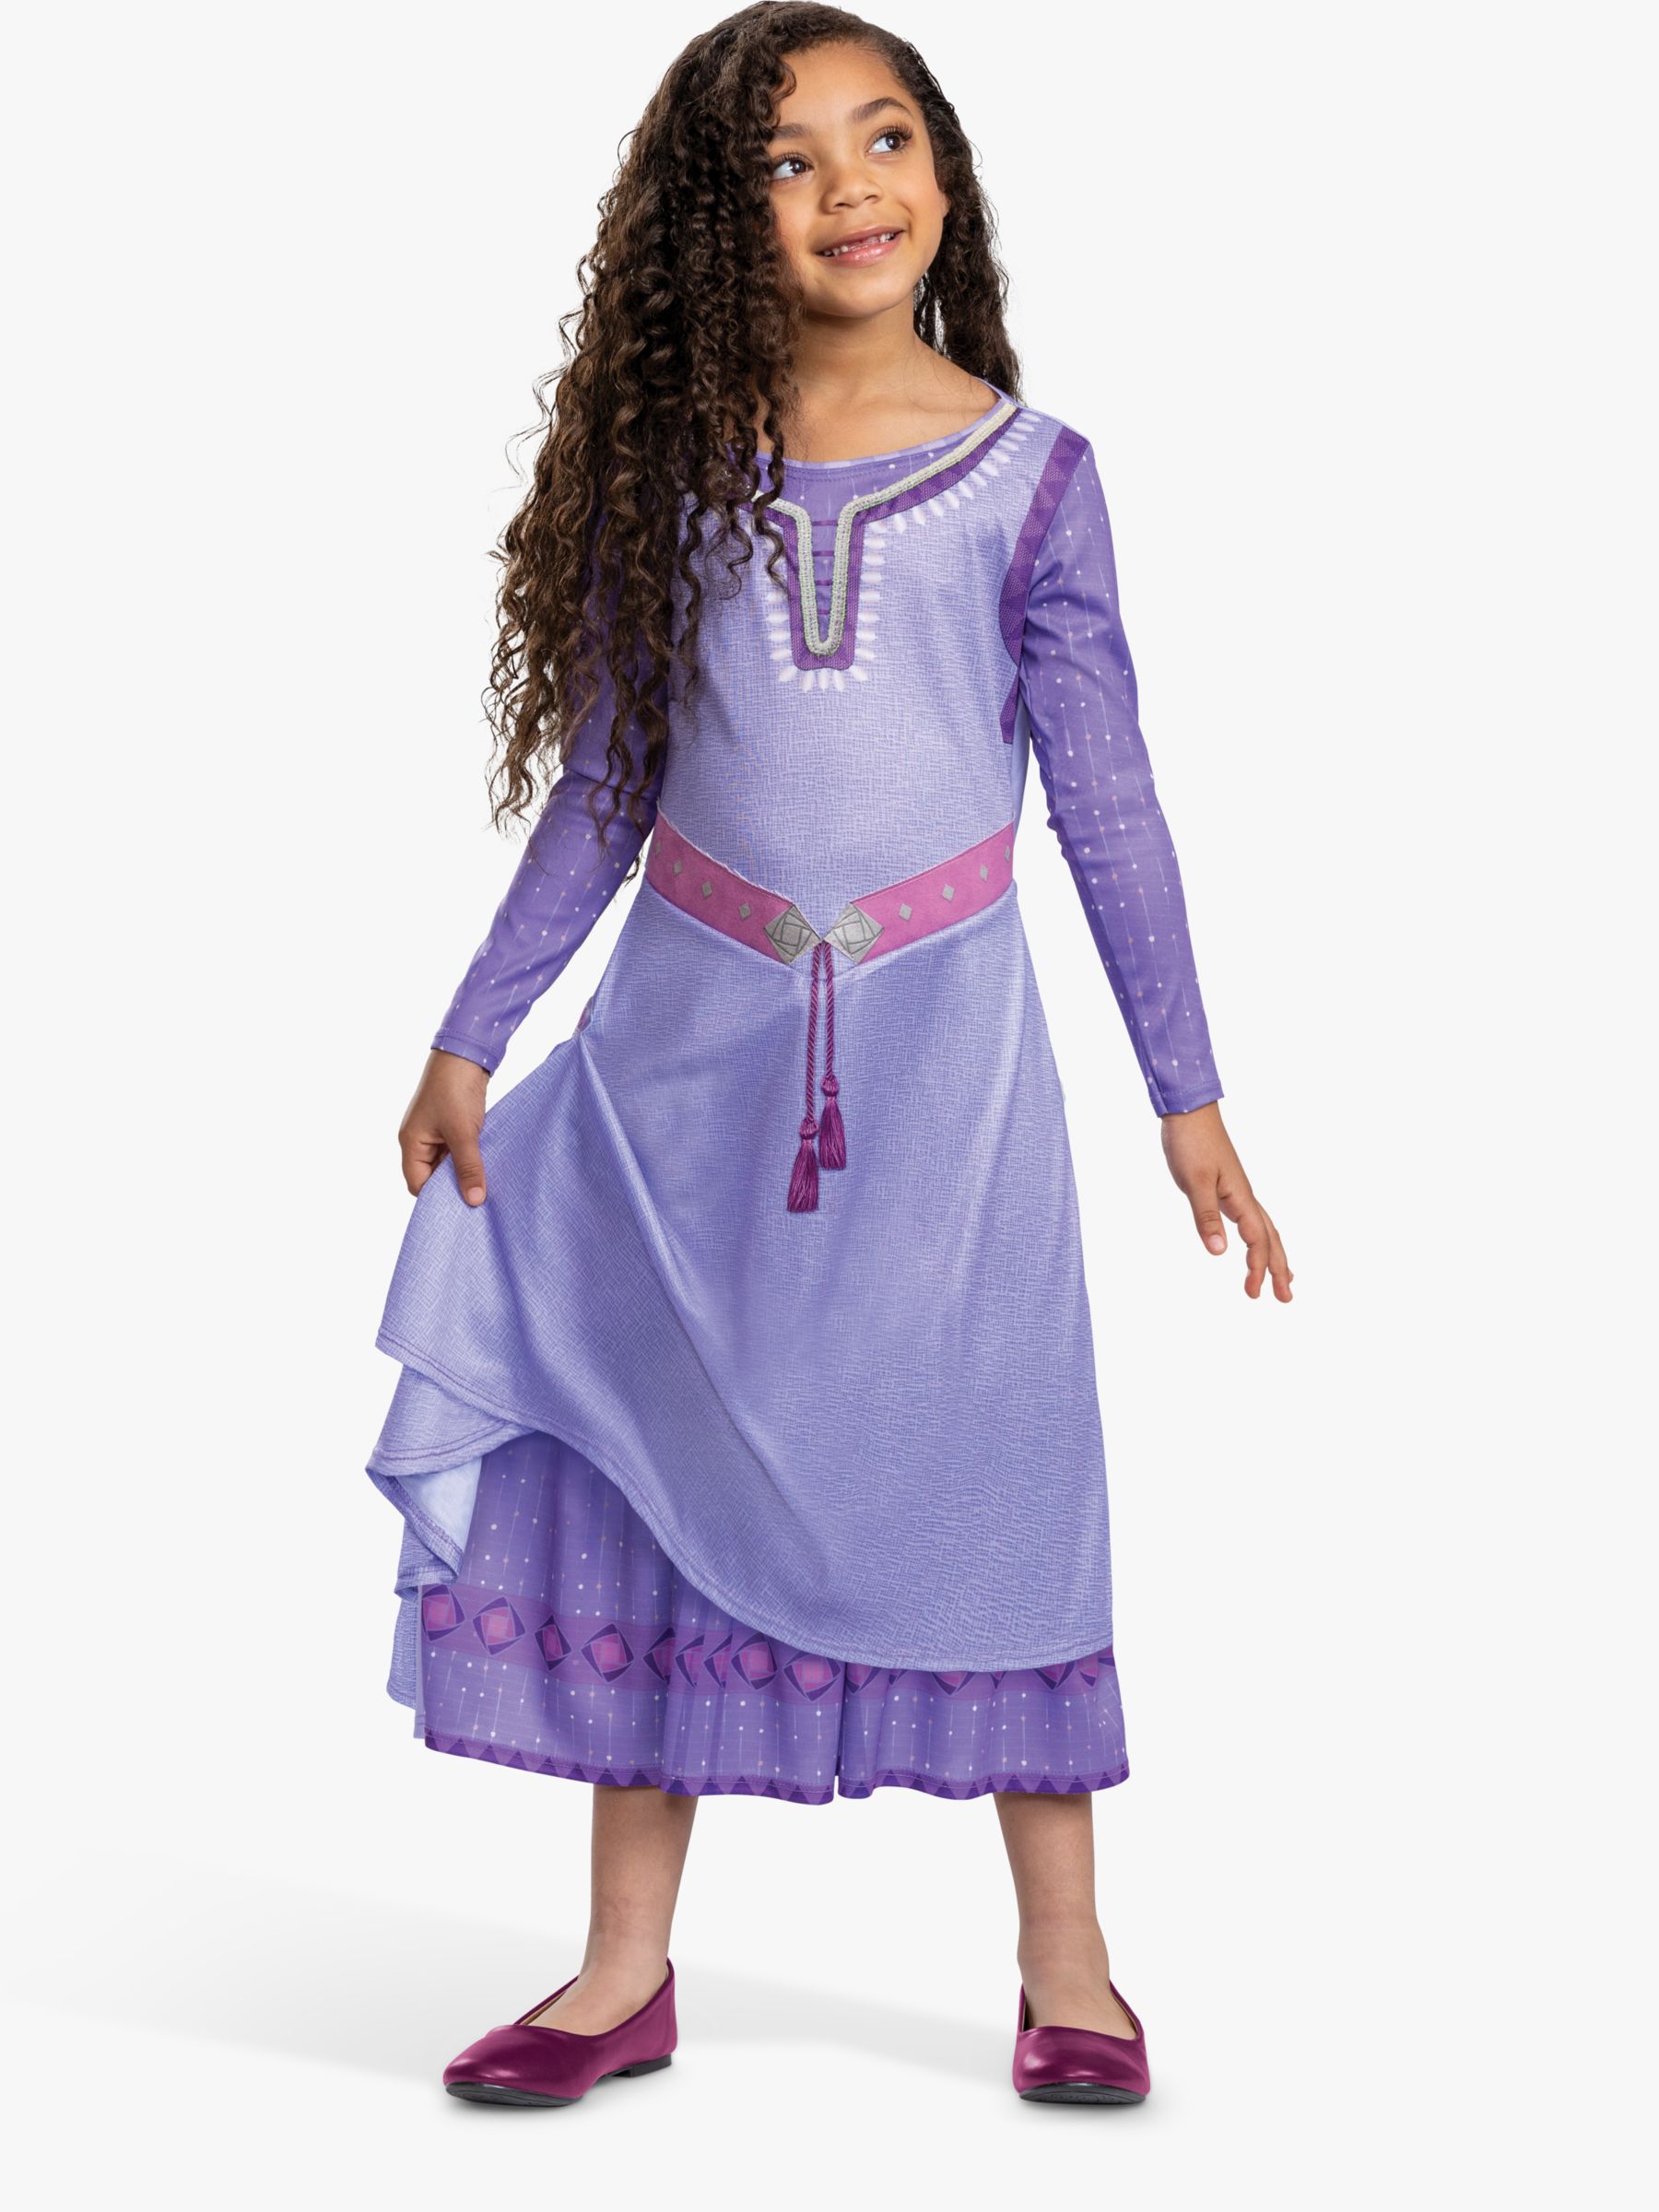  Asha Costume, Official Disney Wish Child Costume with